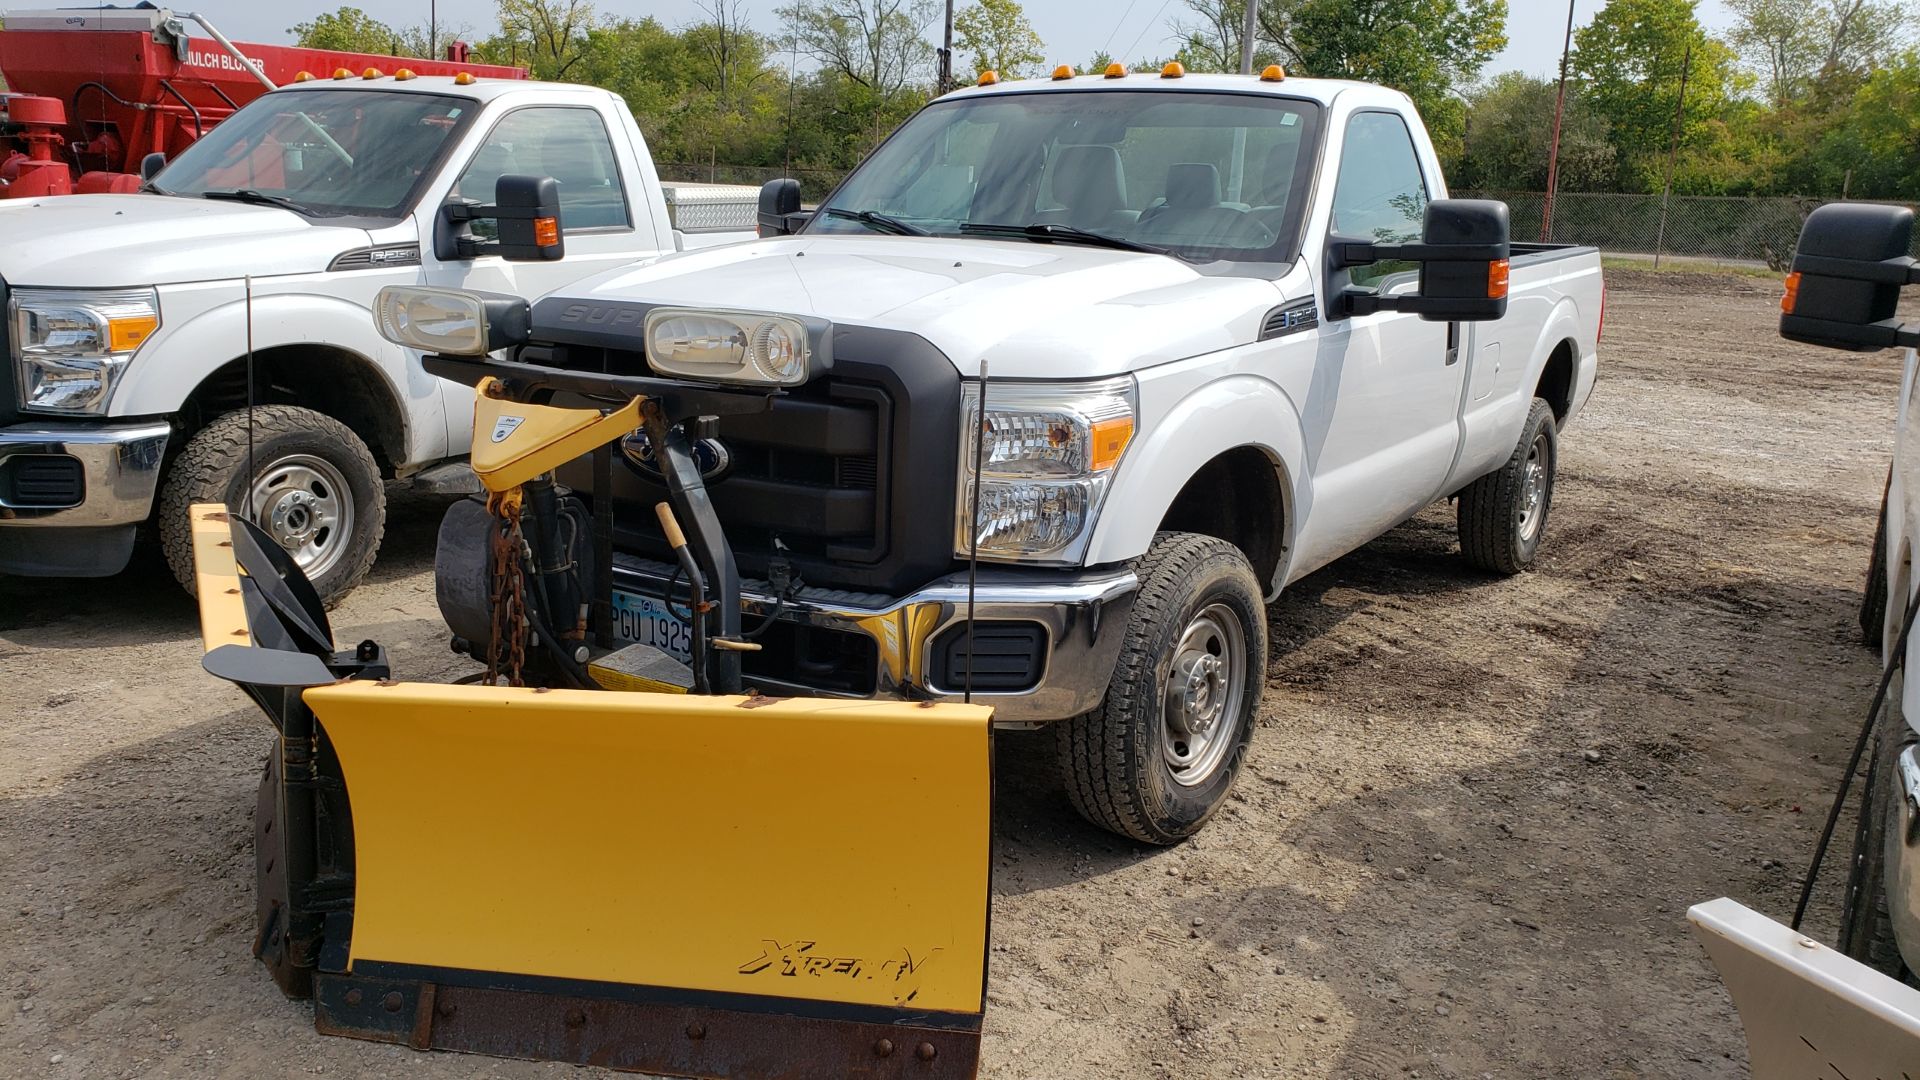 2011 Ford F250 Super Duty Pickup Truck, 8’ Bed, 4x4, 6.2 Liter Flex Fuel,Automatic, Air, Tilt, - Image 2 of 11